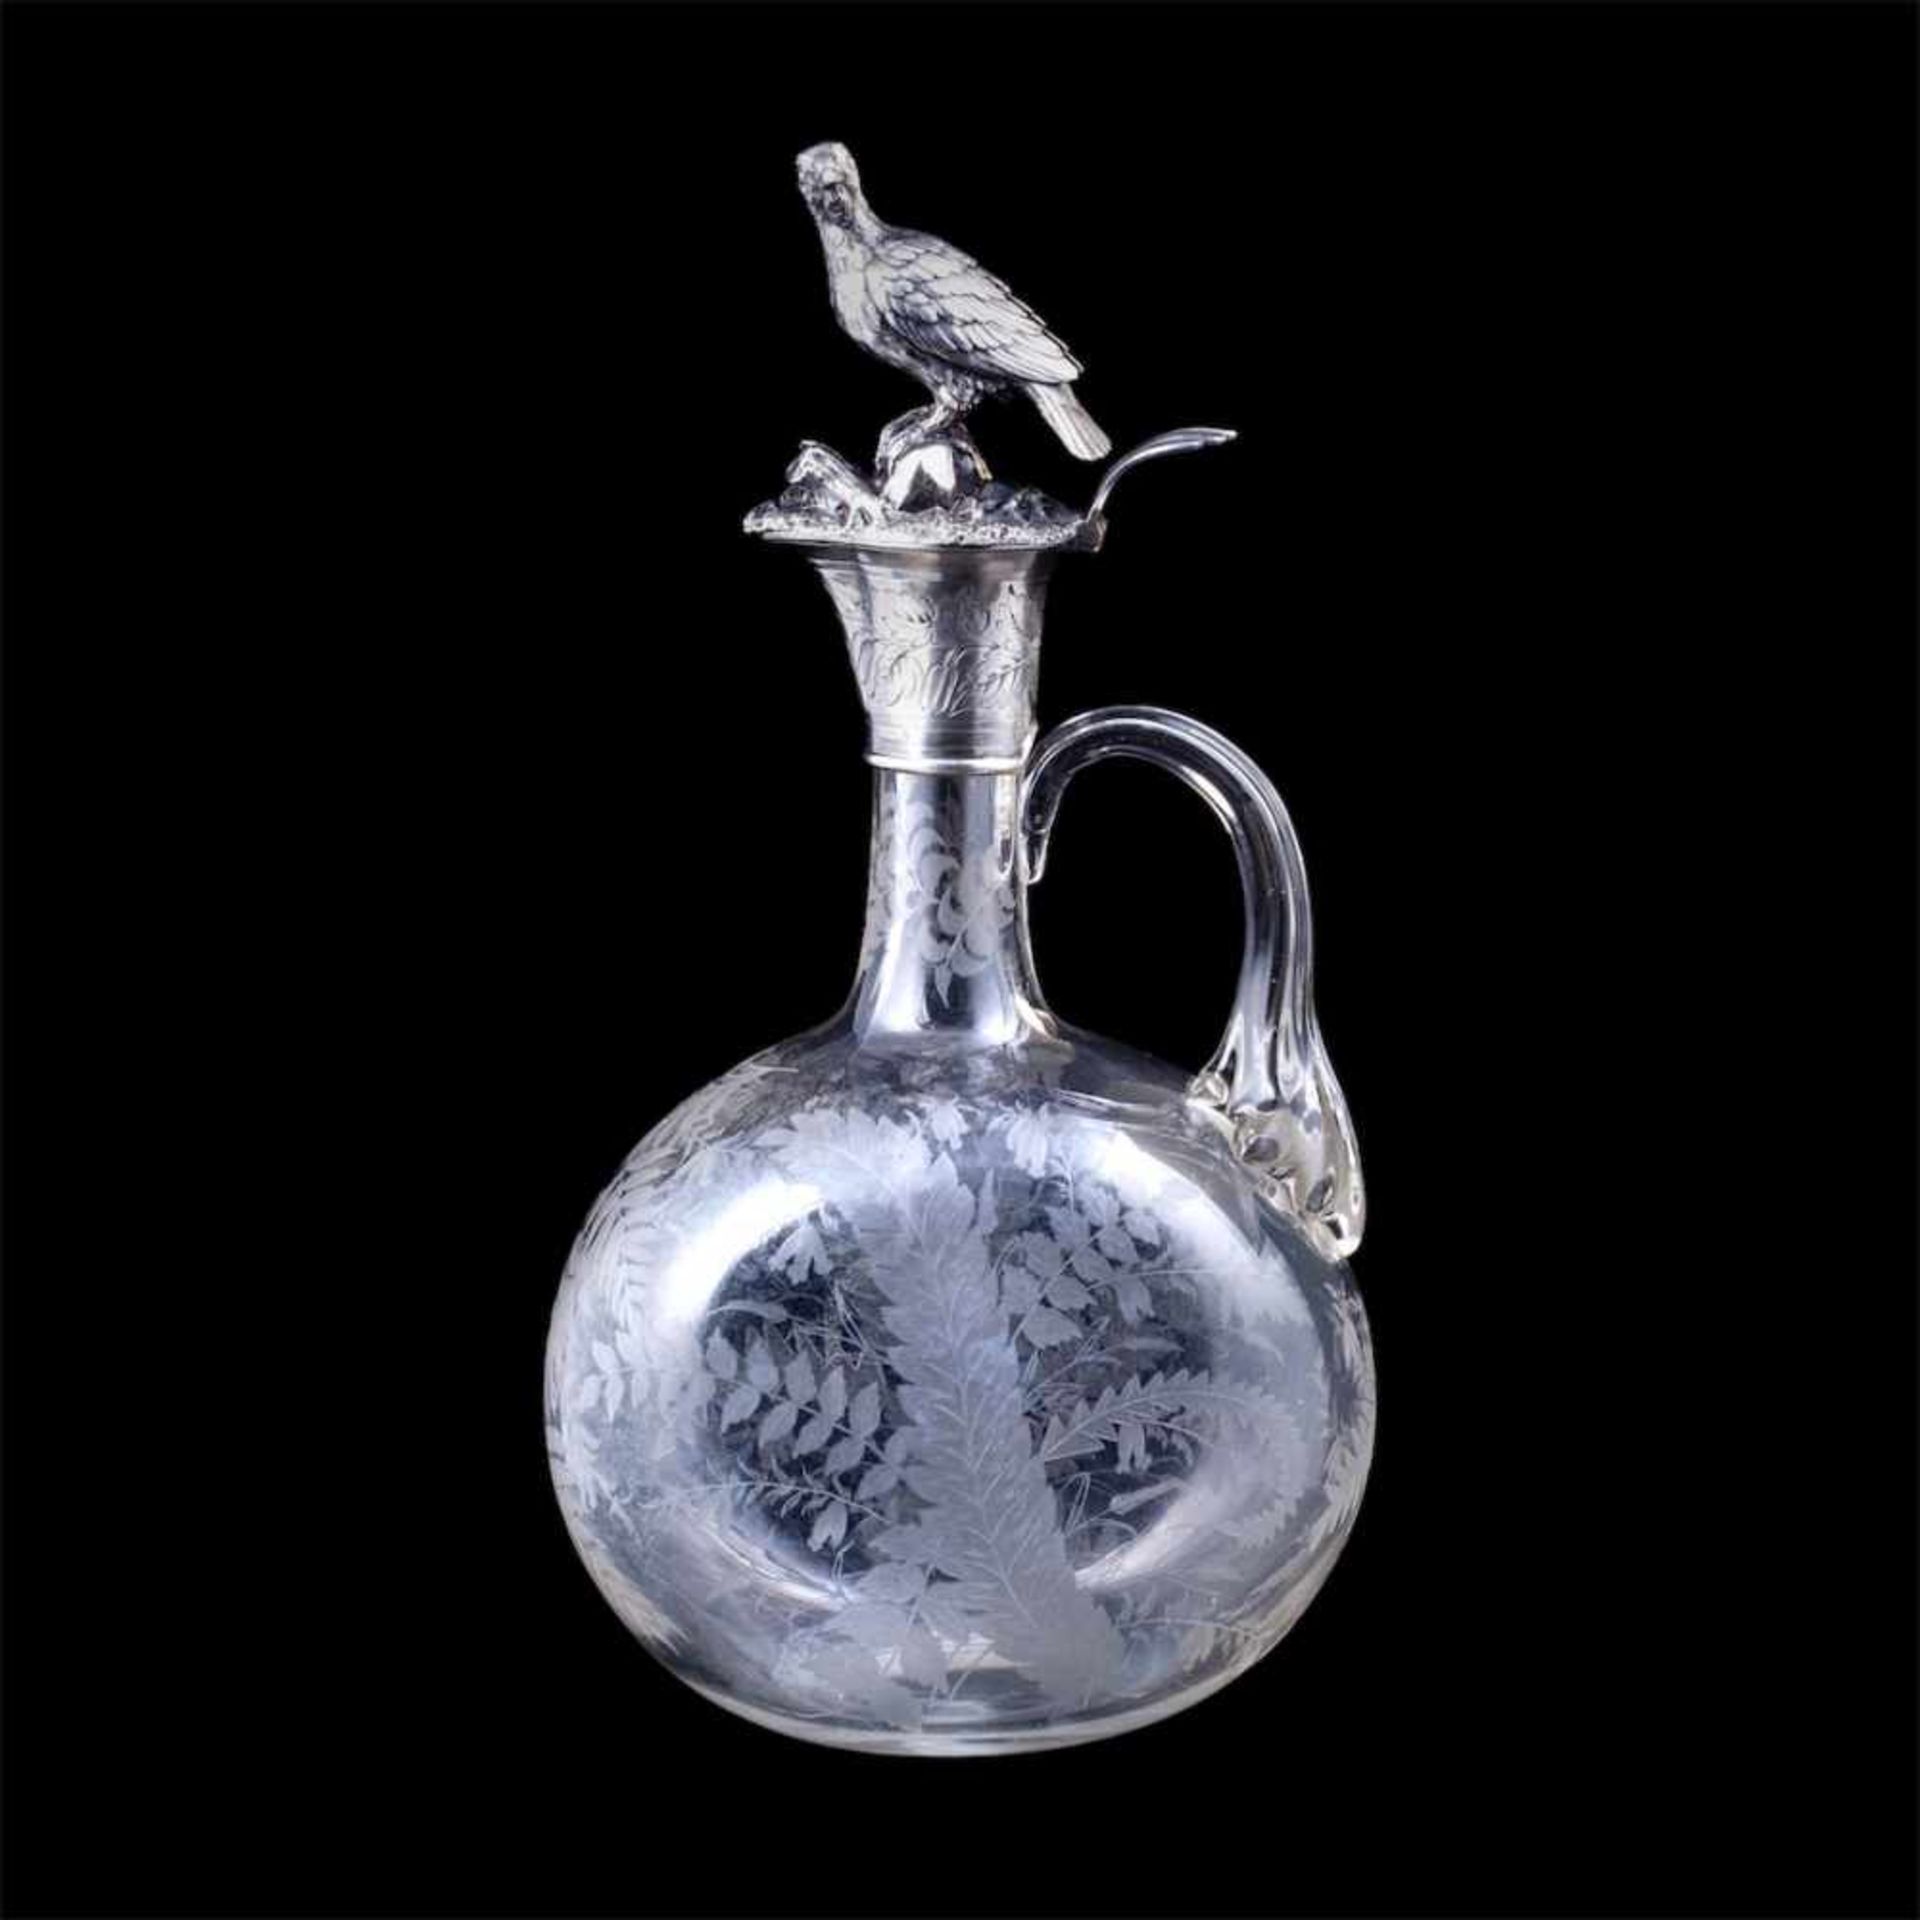 A Russian decanter with a floral decoration